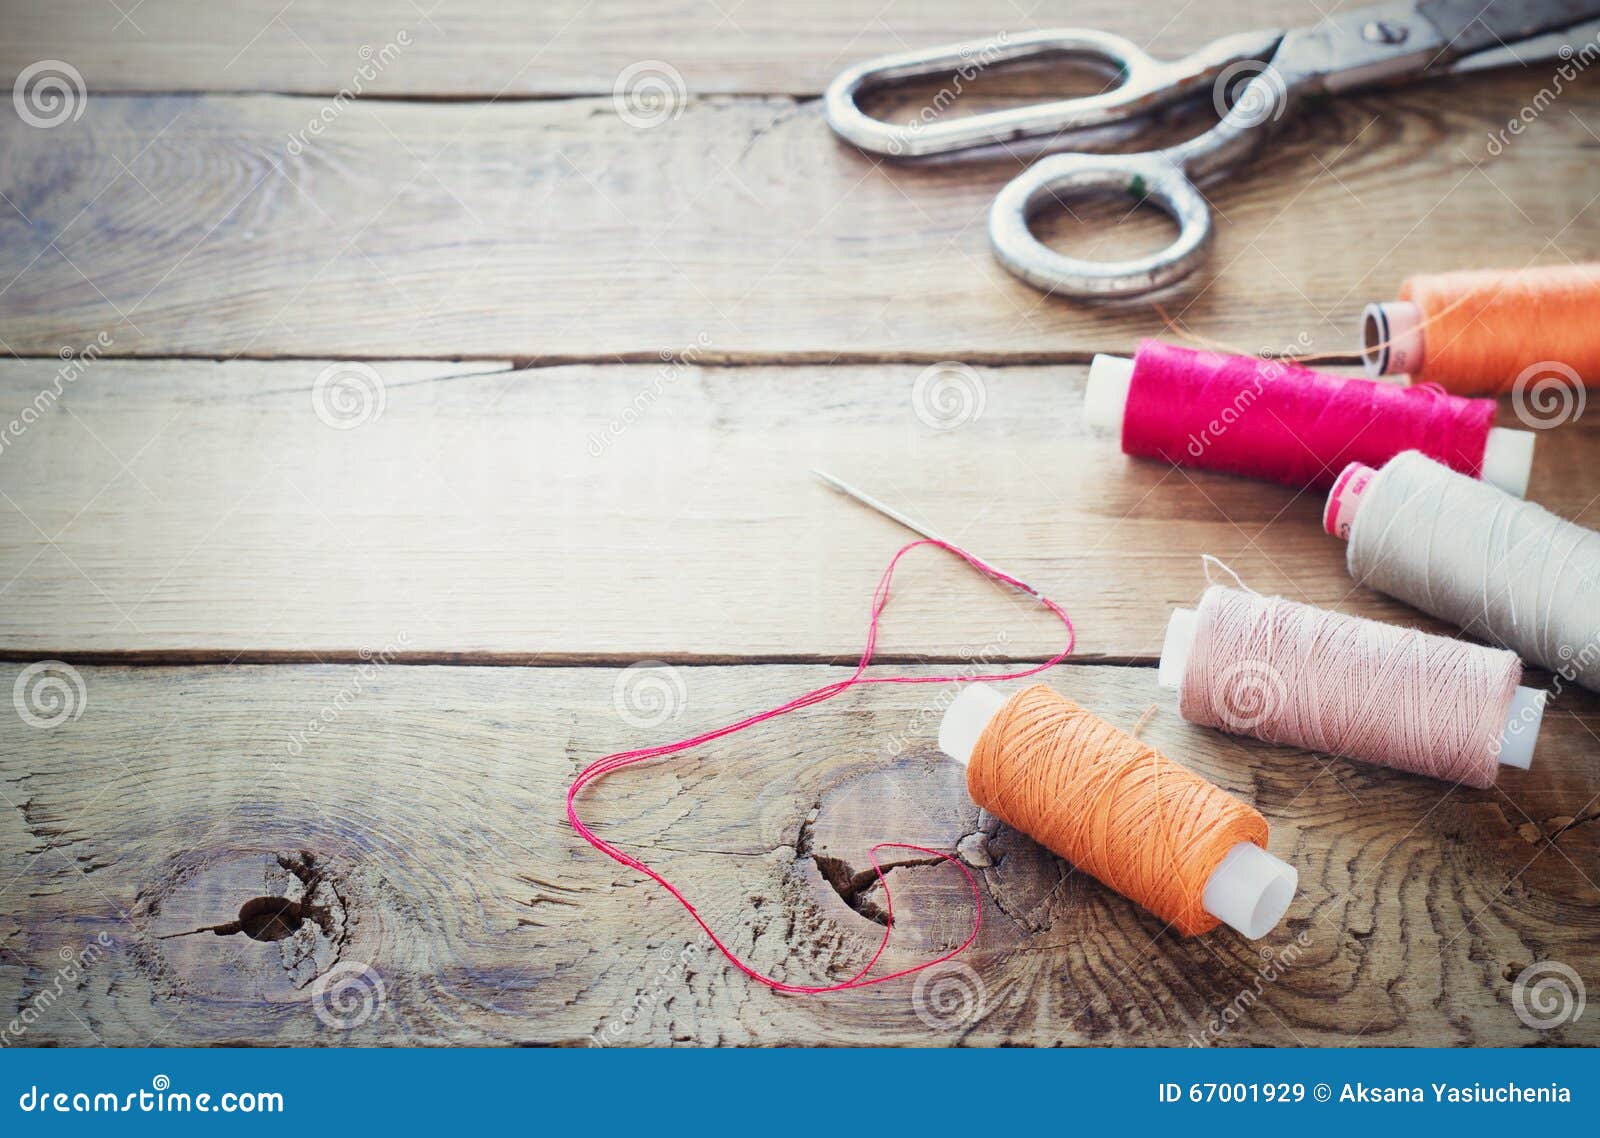 Background Material Sewing Thread Fabric Scissors Stock Photo